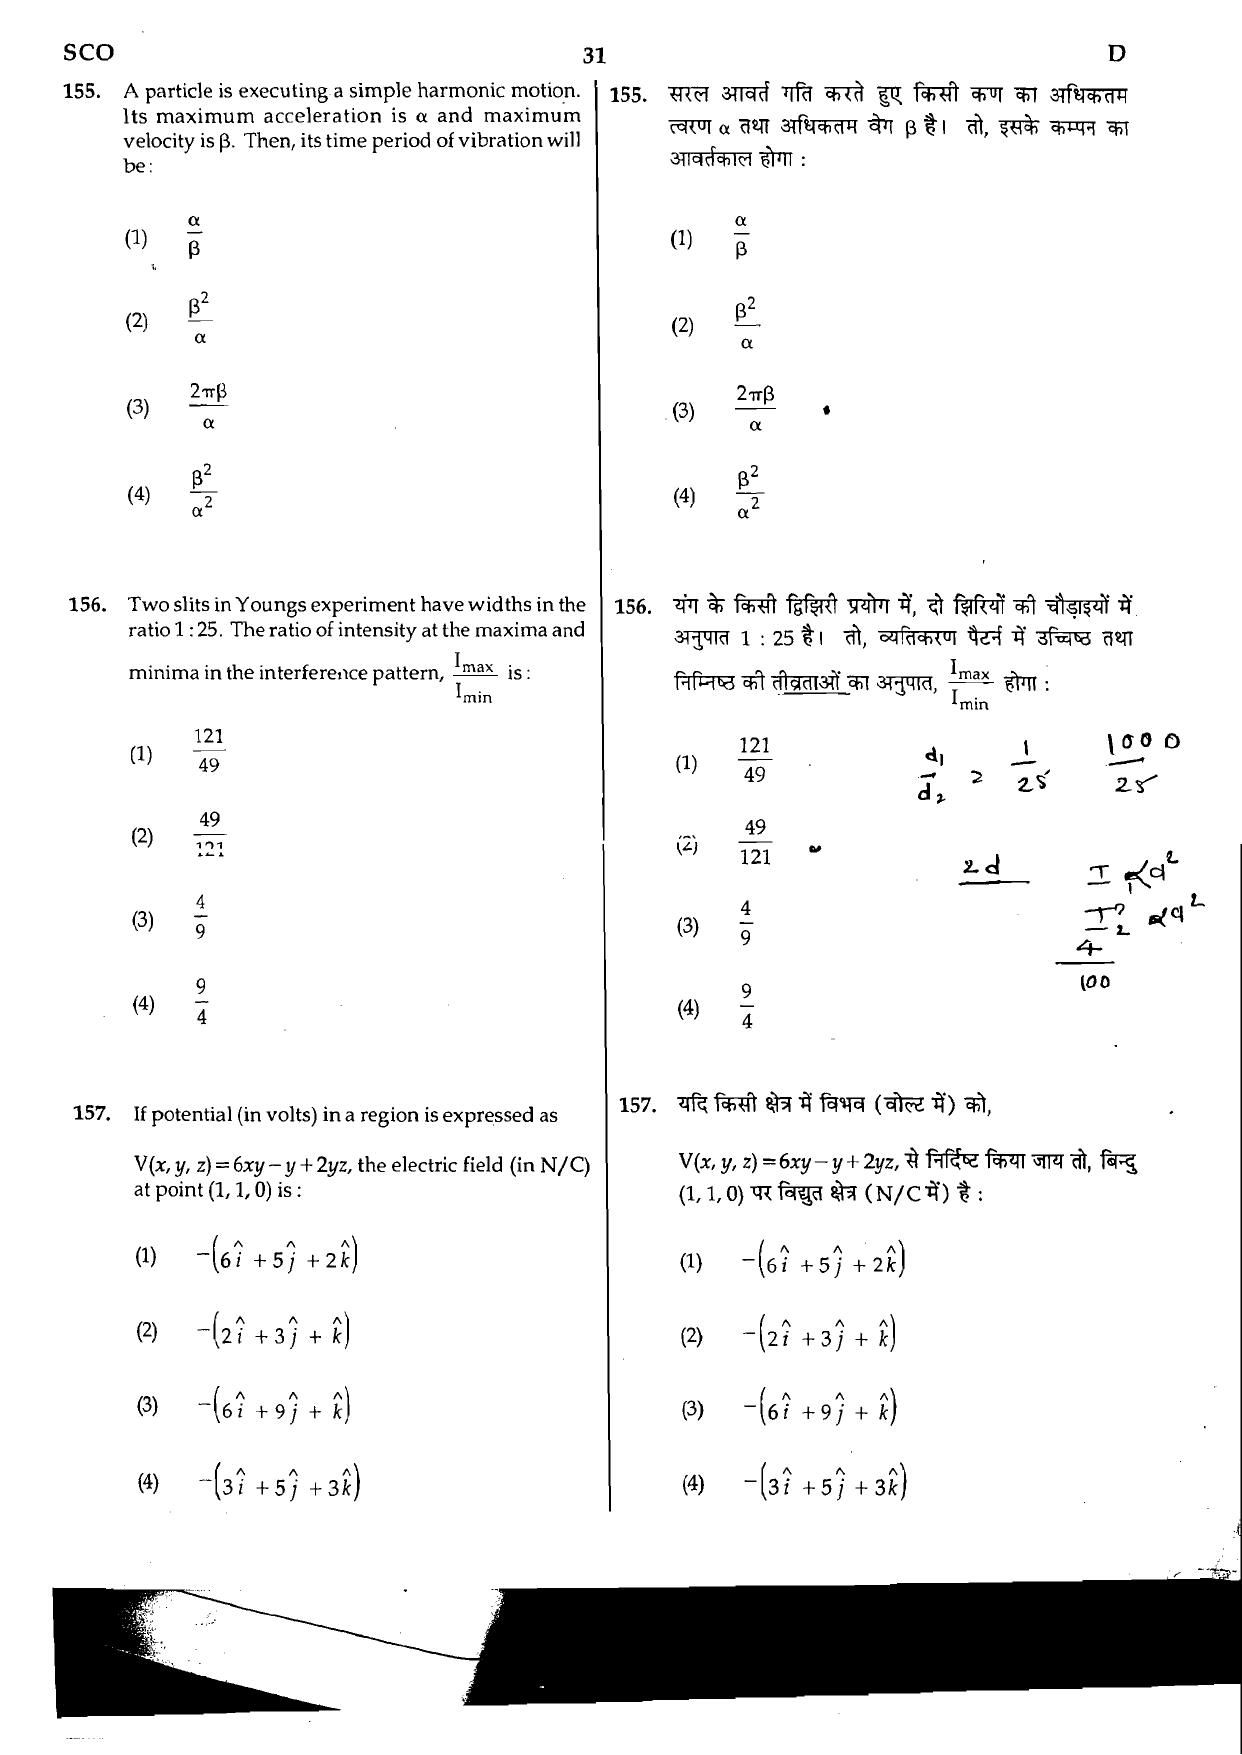 NEET Code D 2015 Question Paper - Page 31